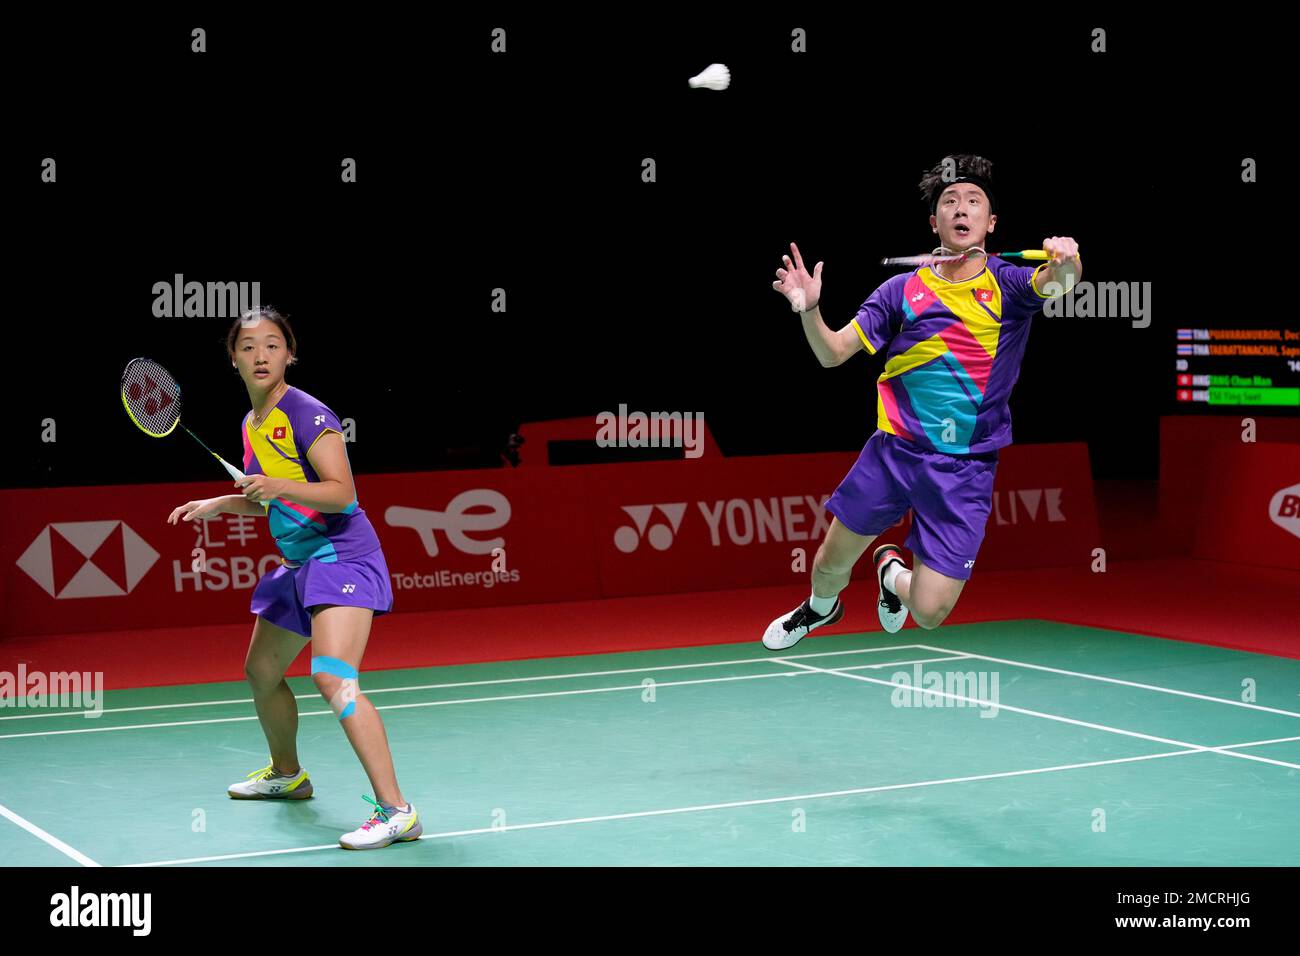 Hong Kongs Tang Chun Man, right, and Tse Ying Suet compete against Thailands Dechapol Puavaranukroh and Sapsiree Taerattanachai during their mixed doubles badminton group stage match at the BWF World Tour Finals